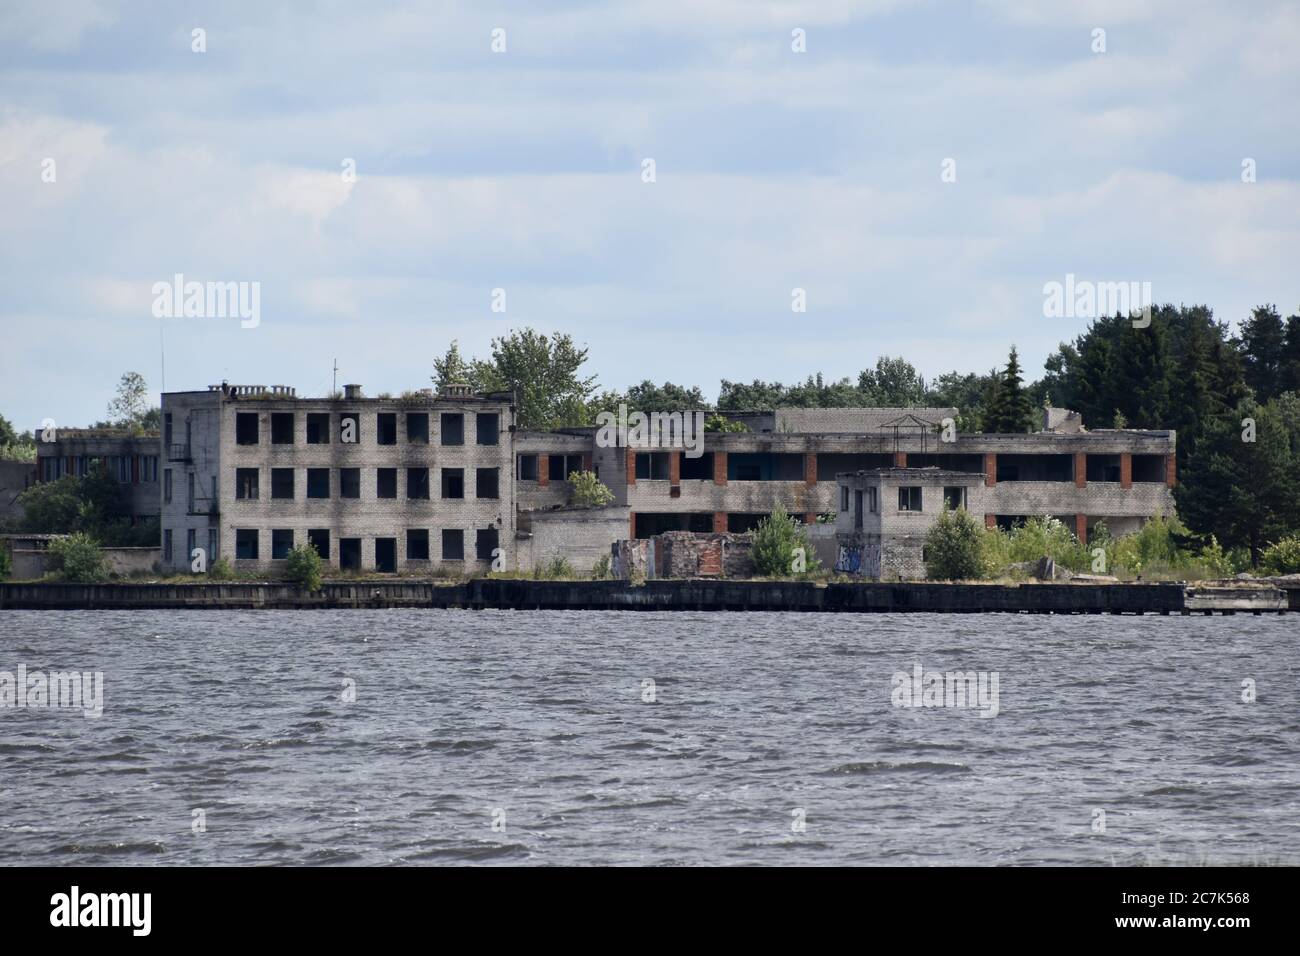 Abandoned buildings complex on the shore. Stock Photo